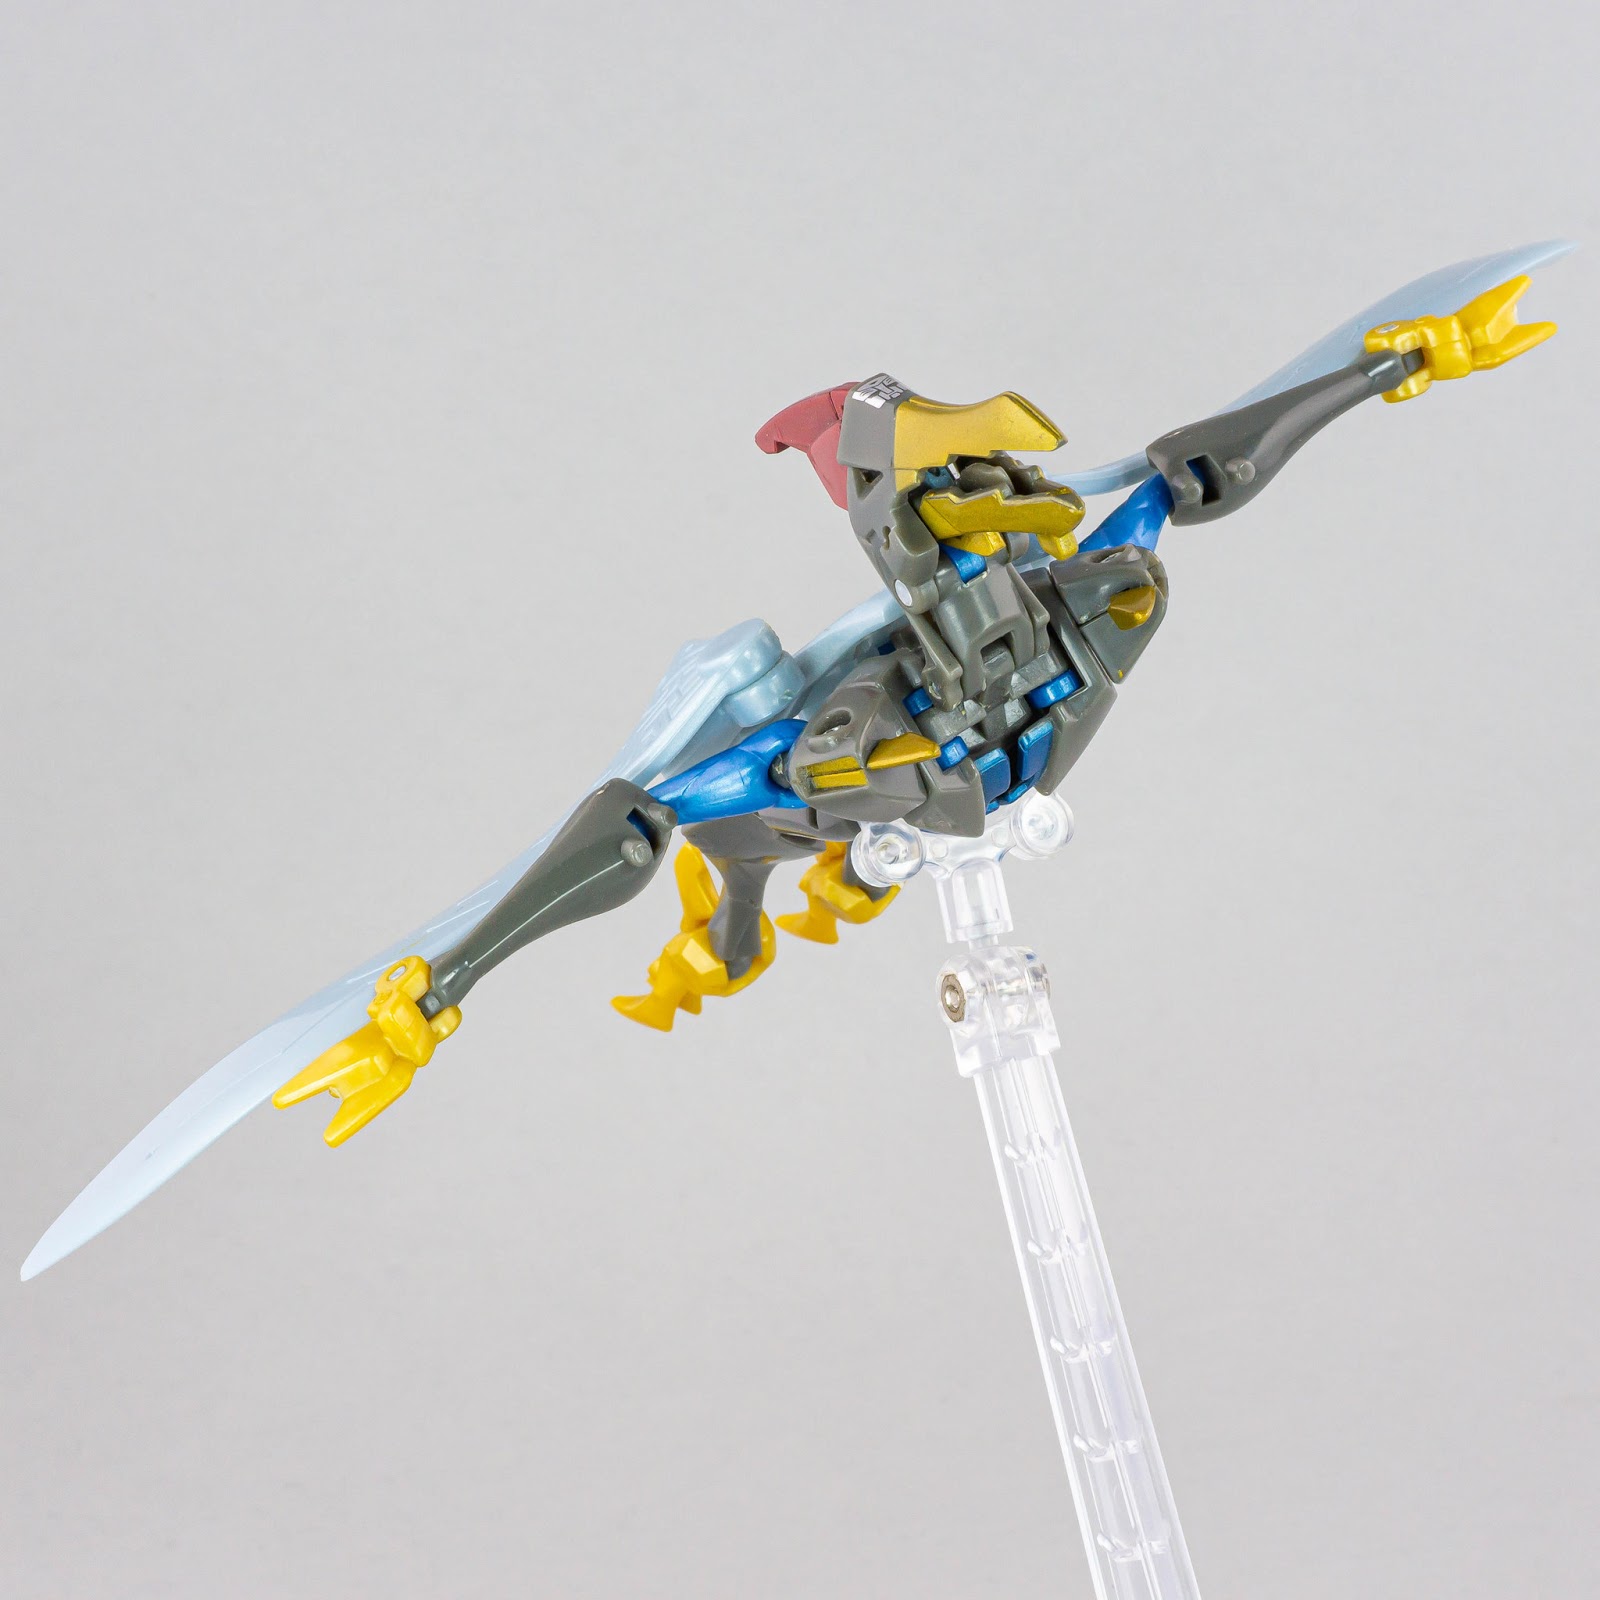 Transformers Animated Swoop Pteranodon mode in flight